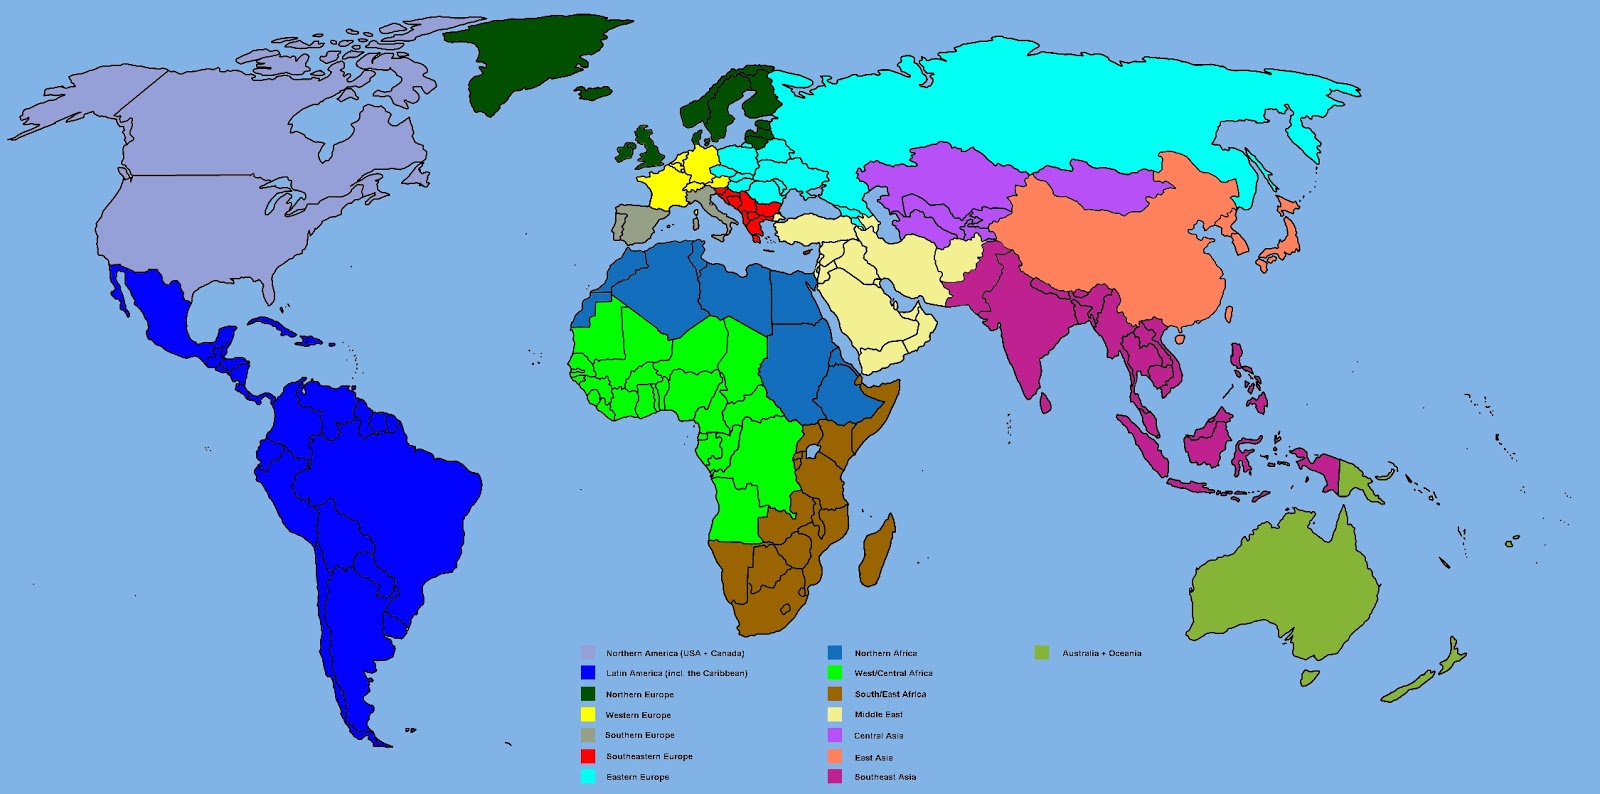 Empires and Generals: Regions of the world